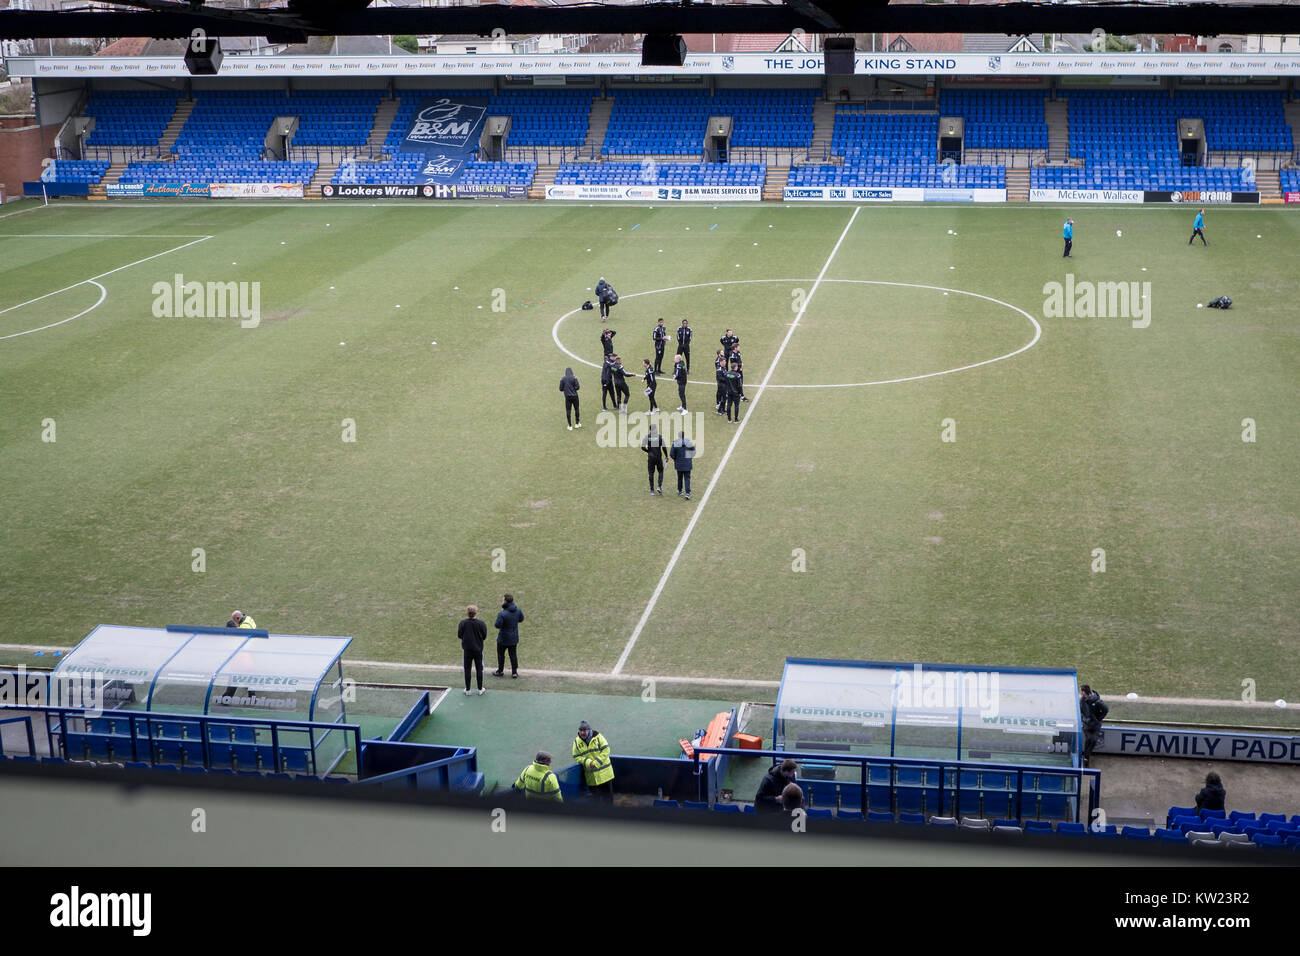 Tranmere, Merseyside, UK. 30th December, 2017. View from the press box: The players have arrived and are out inspecting the pitch before Tranmere Rovers v Guiseley AFC in the Vanarama National League game on Saturday 30 December 2017 at Prenton Park, Tranmere, The Wirral, Merseyside. Photo by Mark P Doherty/Alamy Live News Stock Photo